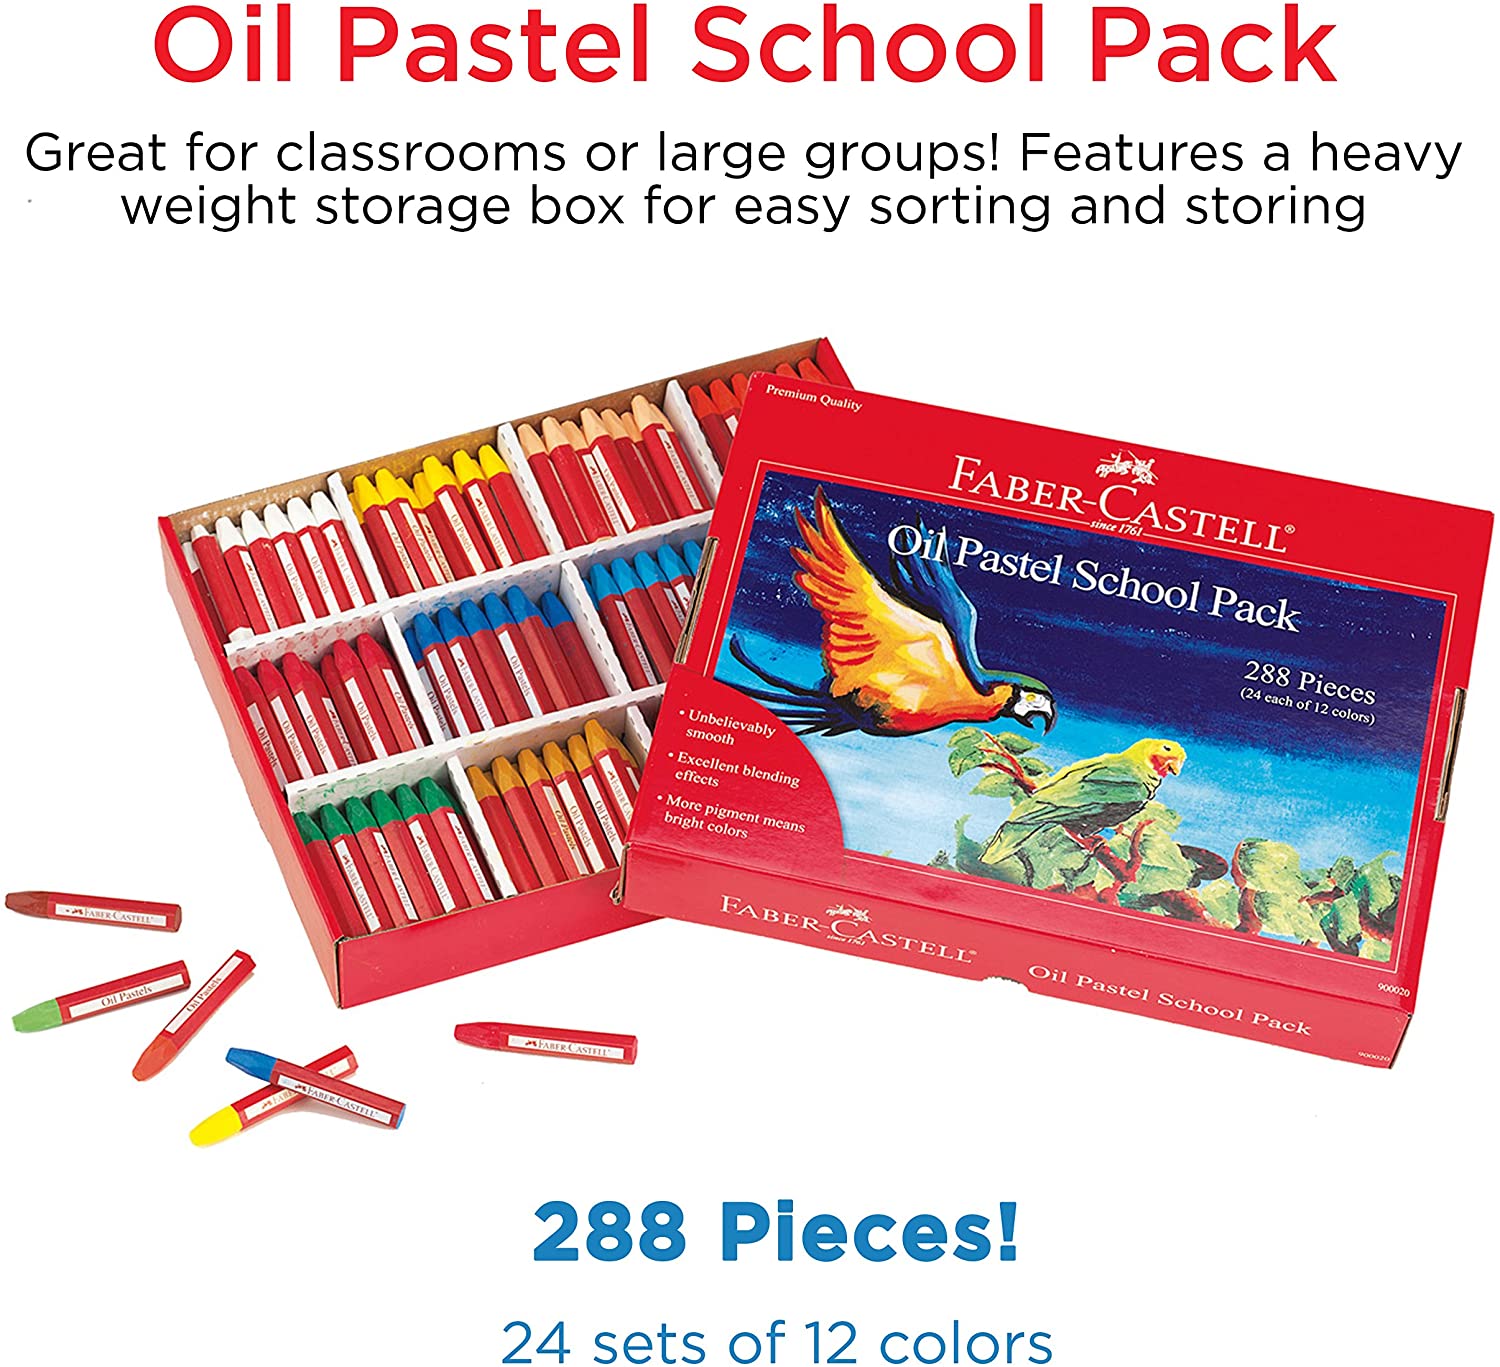 Faber-Castell - Oil Pastels School Pack specification